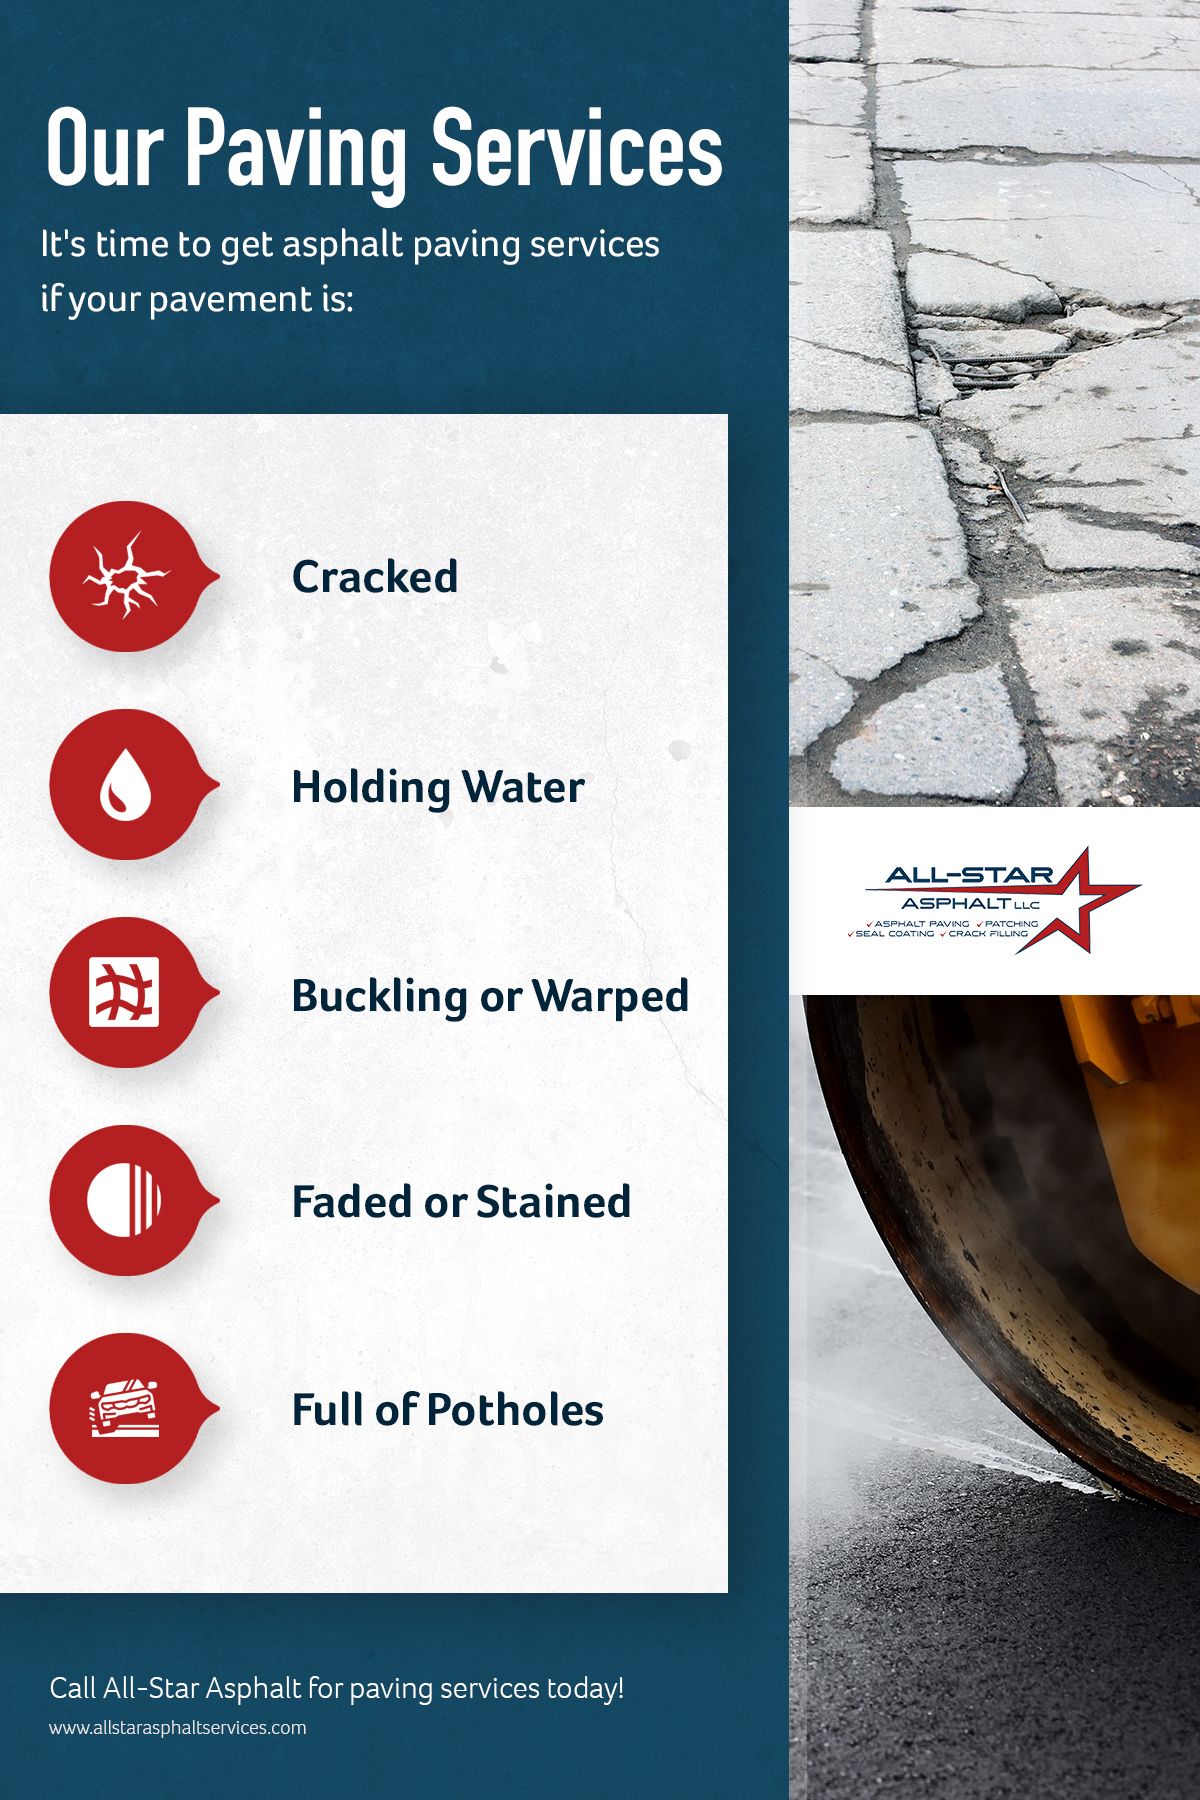 Our-Paving-Services-infographic.jpg